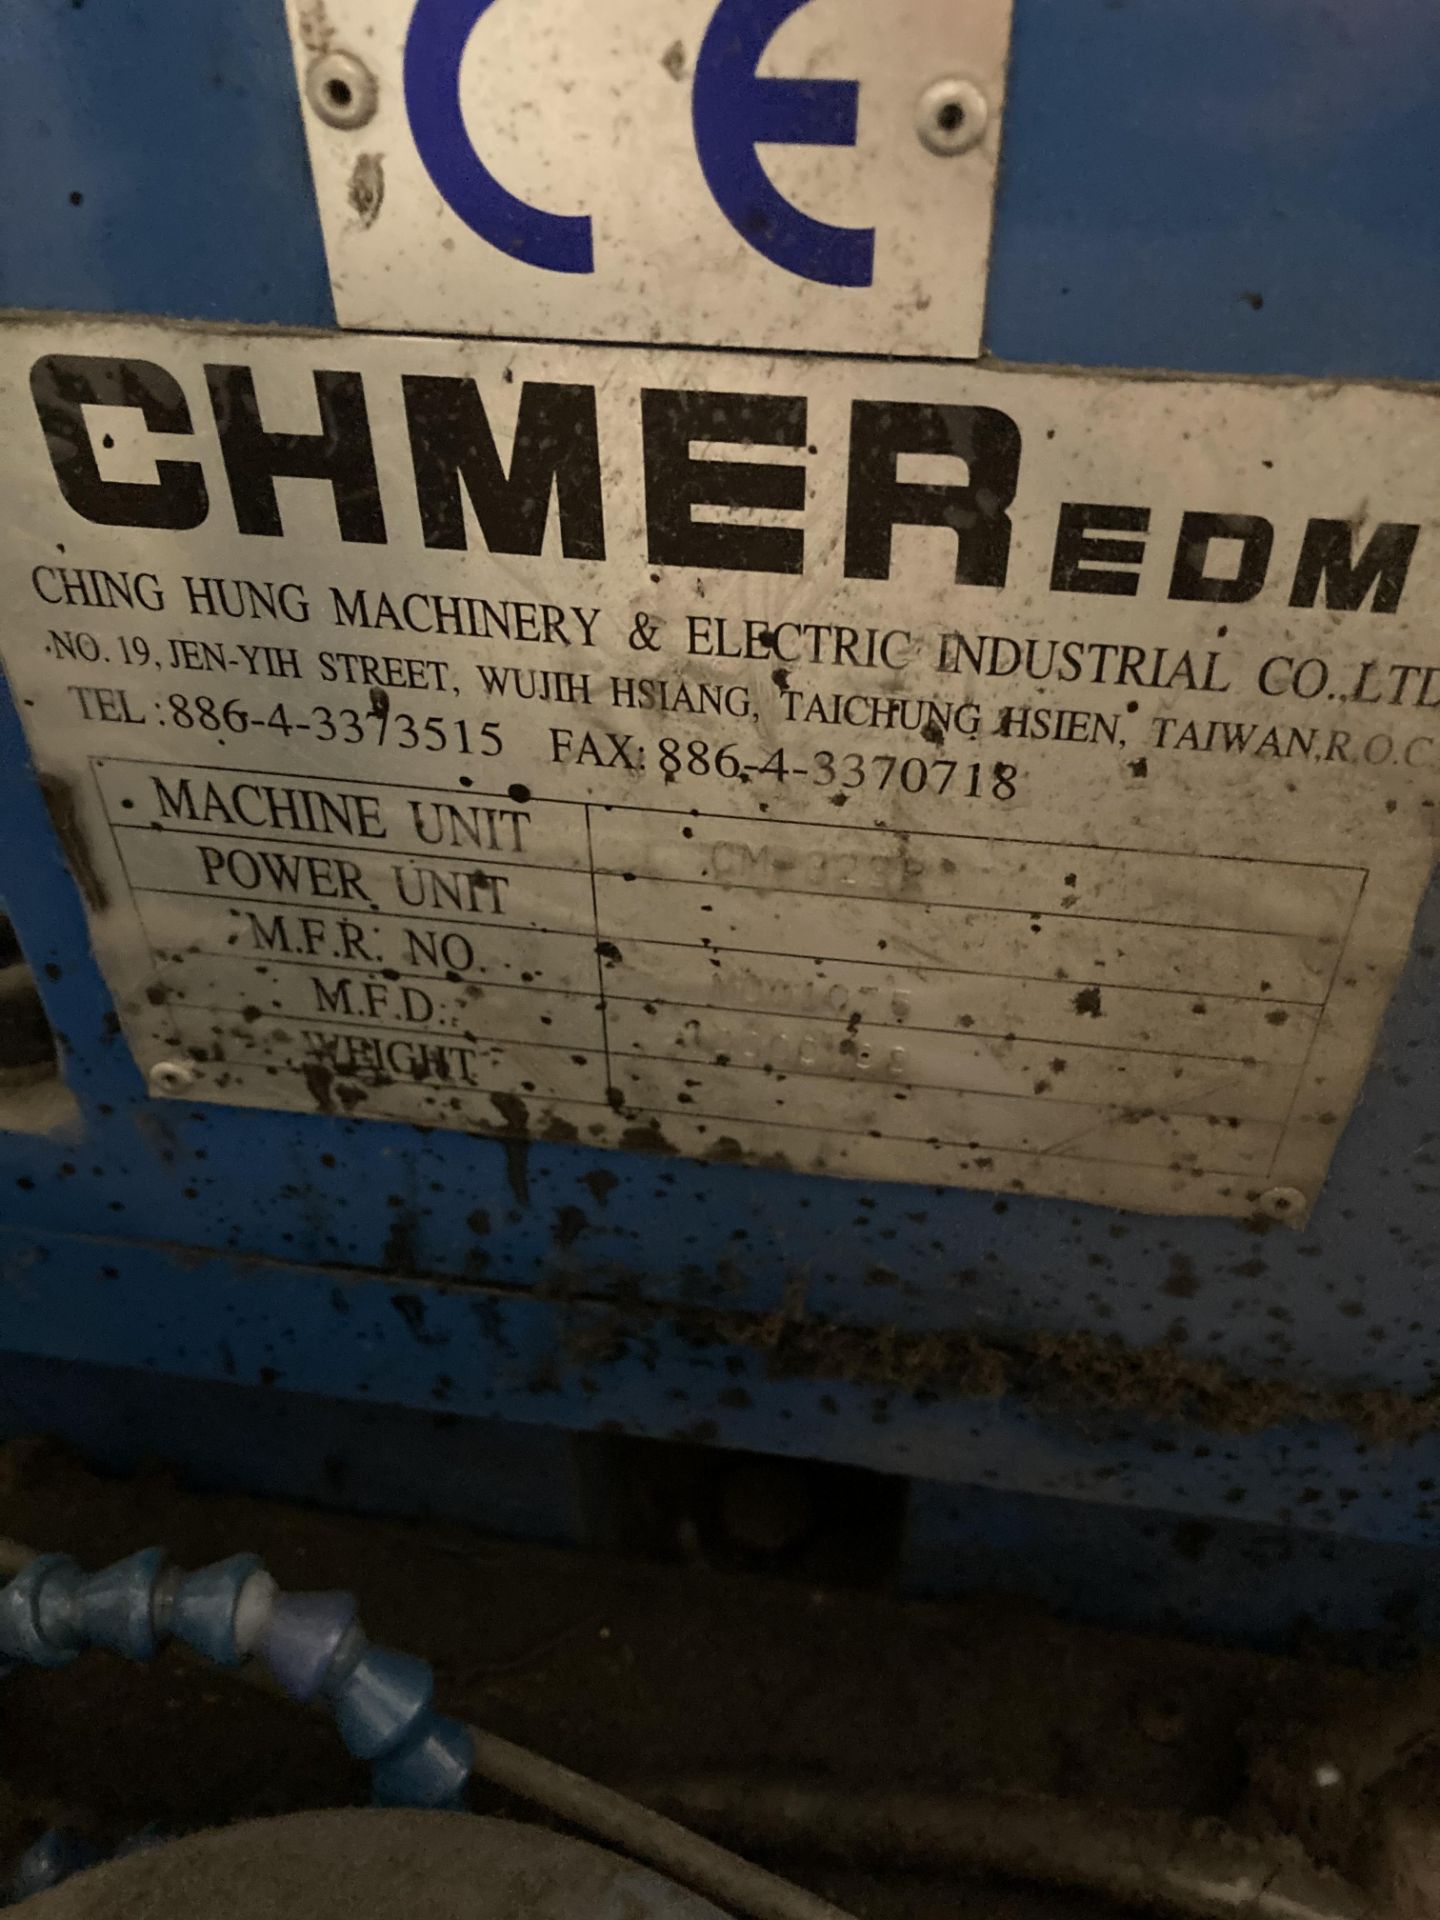 Chmer CM 323-R 3 axis electrical discharge machine, Serial No. M001075 (2000), table size 500mm x - Image 5 of 5